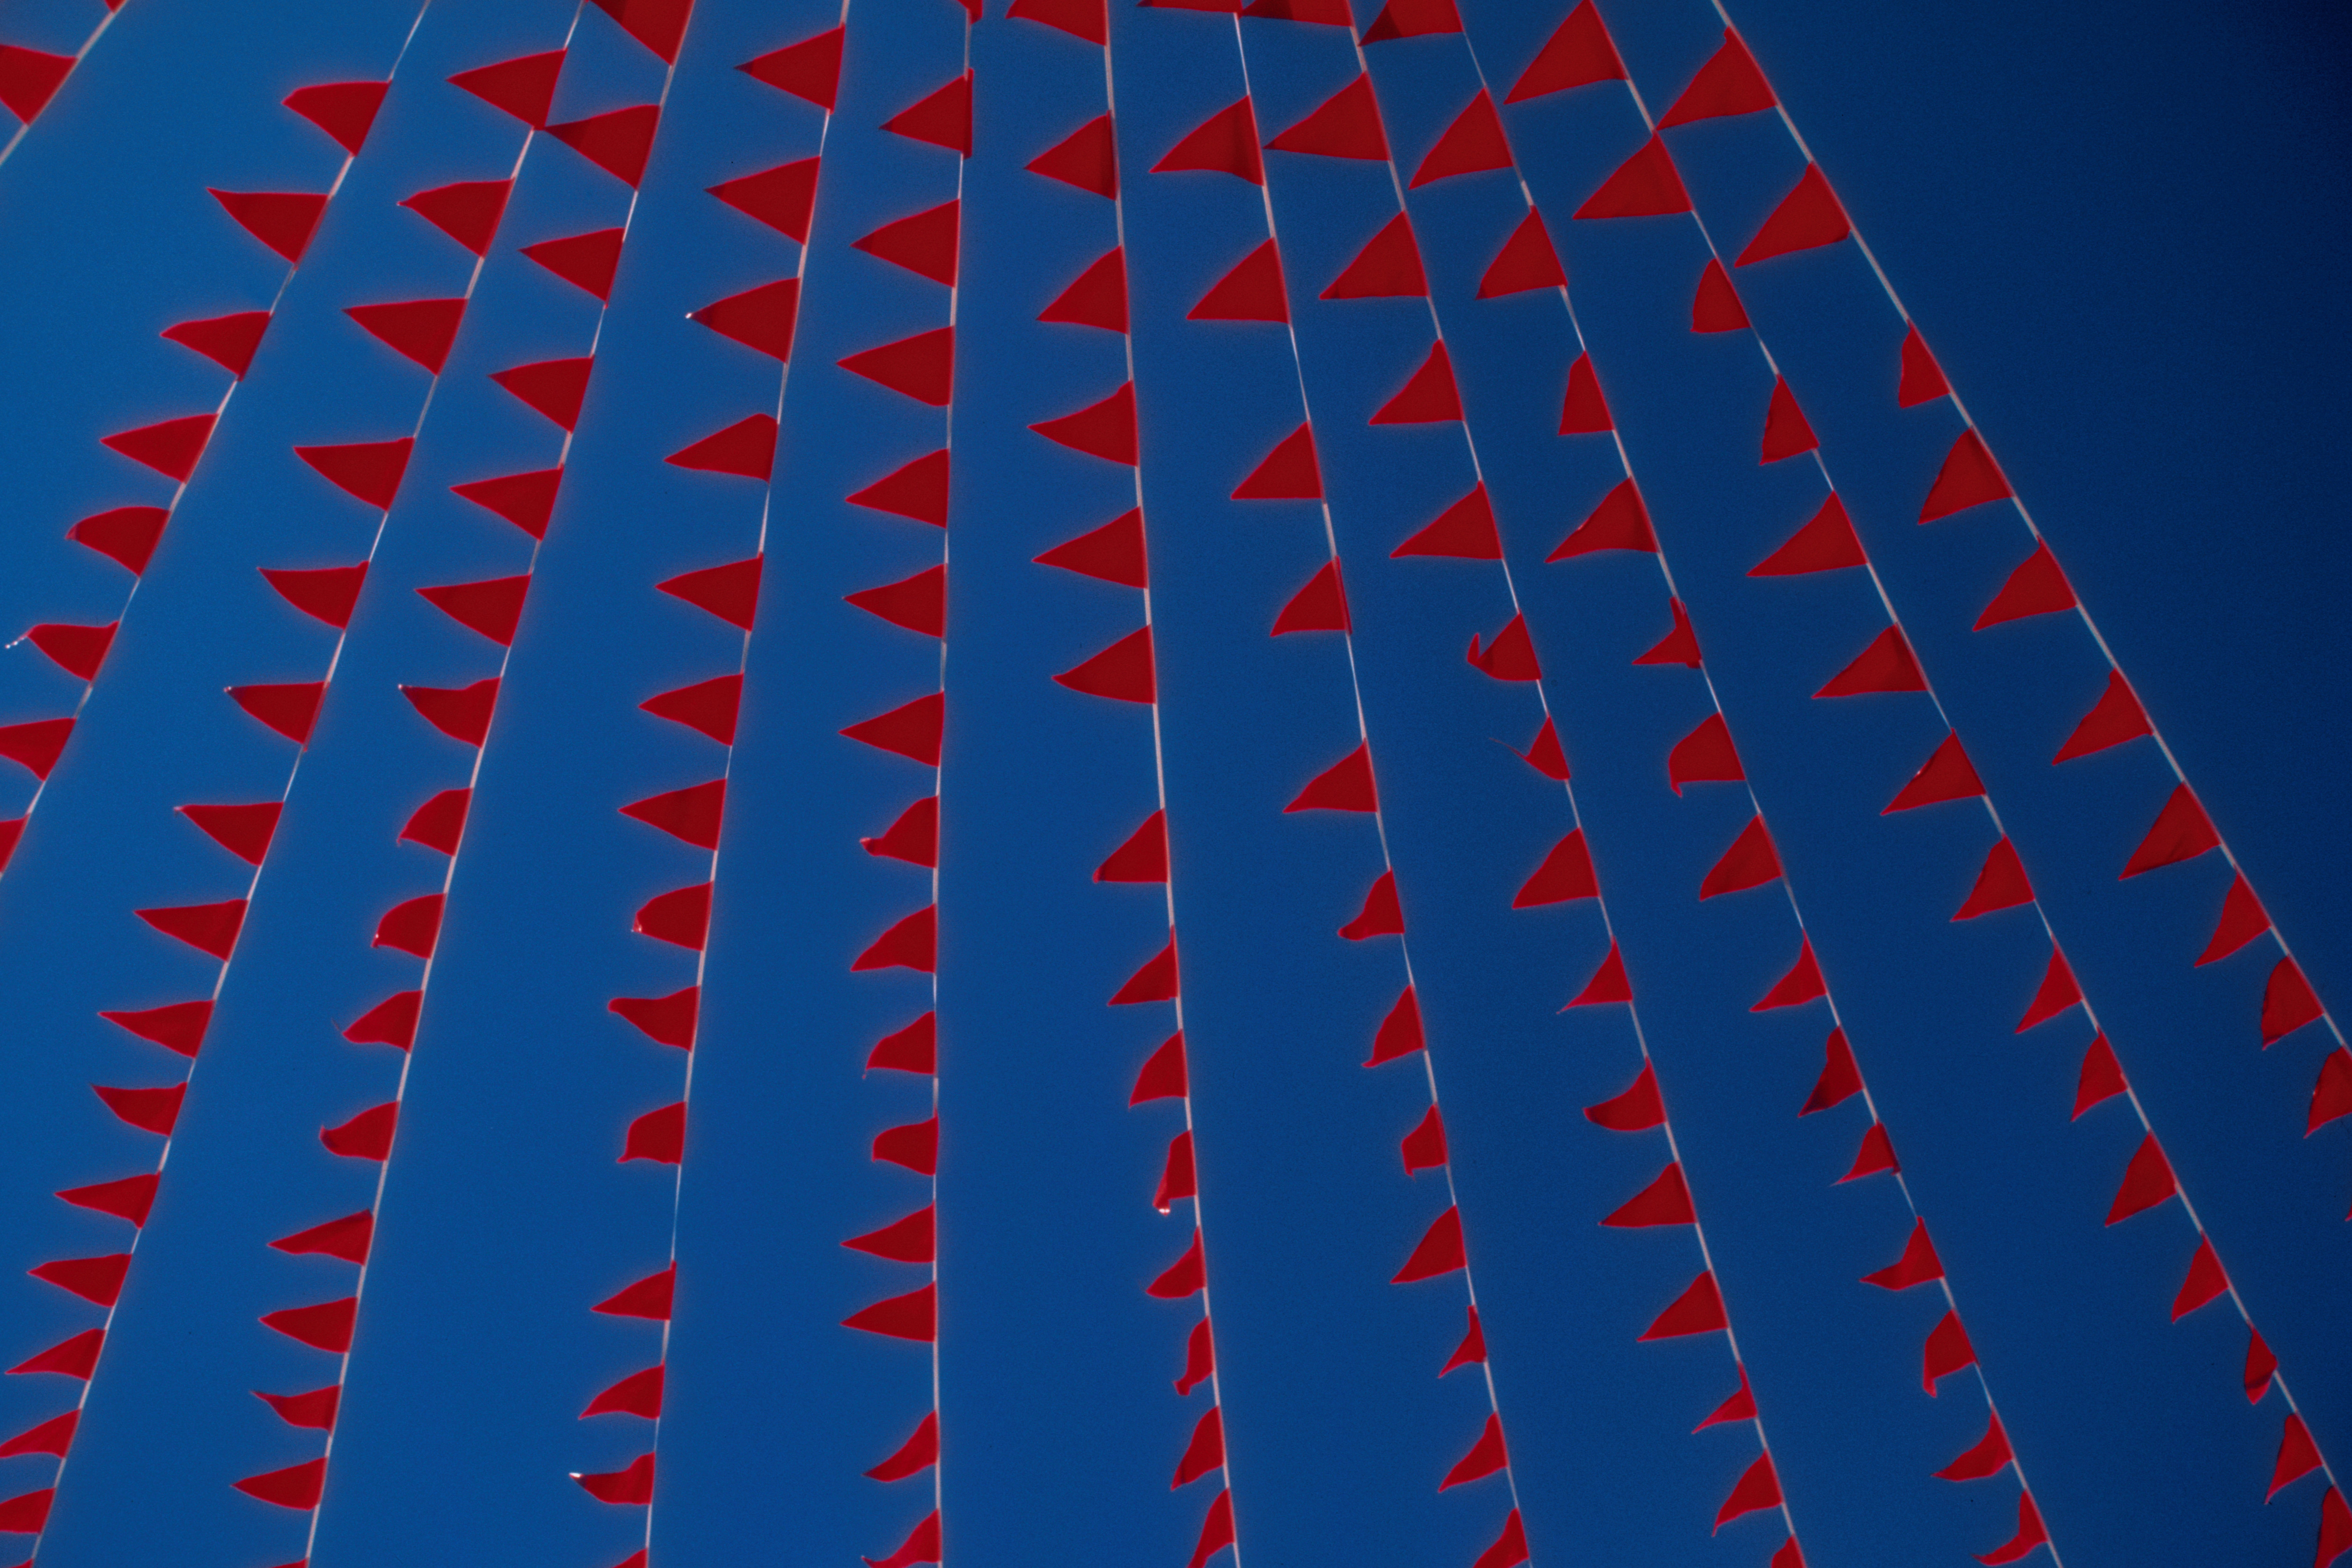 Image of red flags against a blue sky.